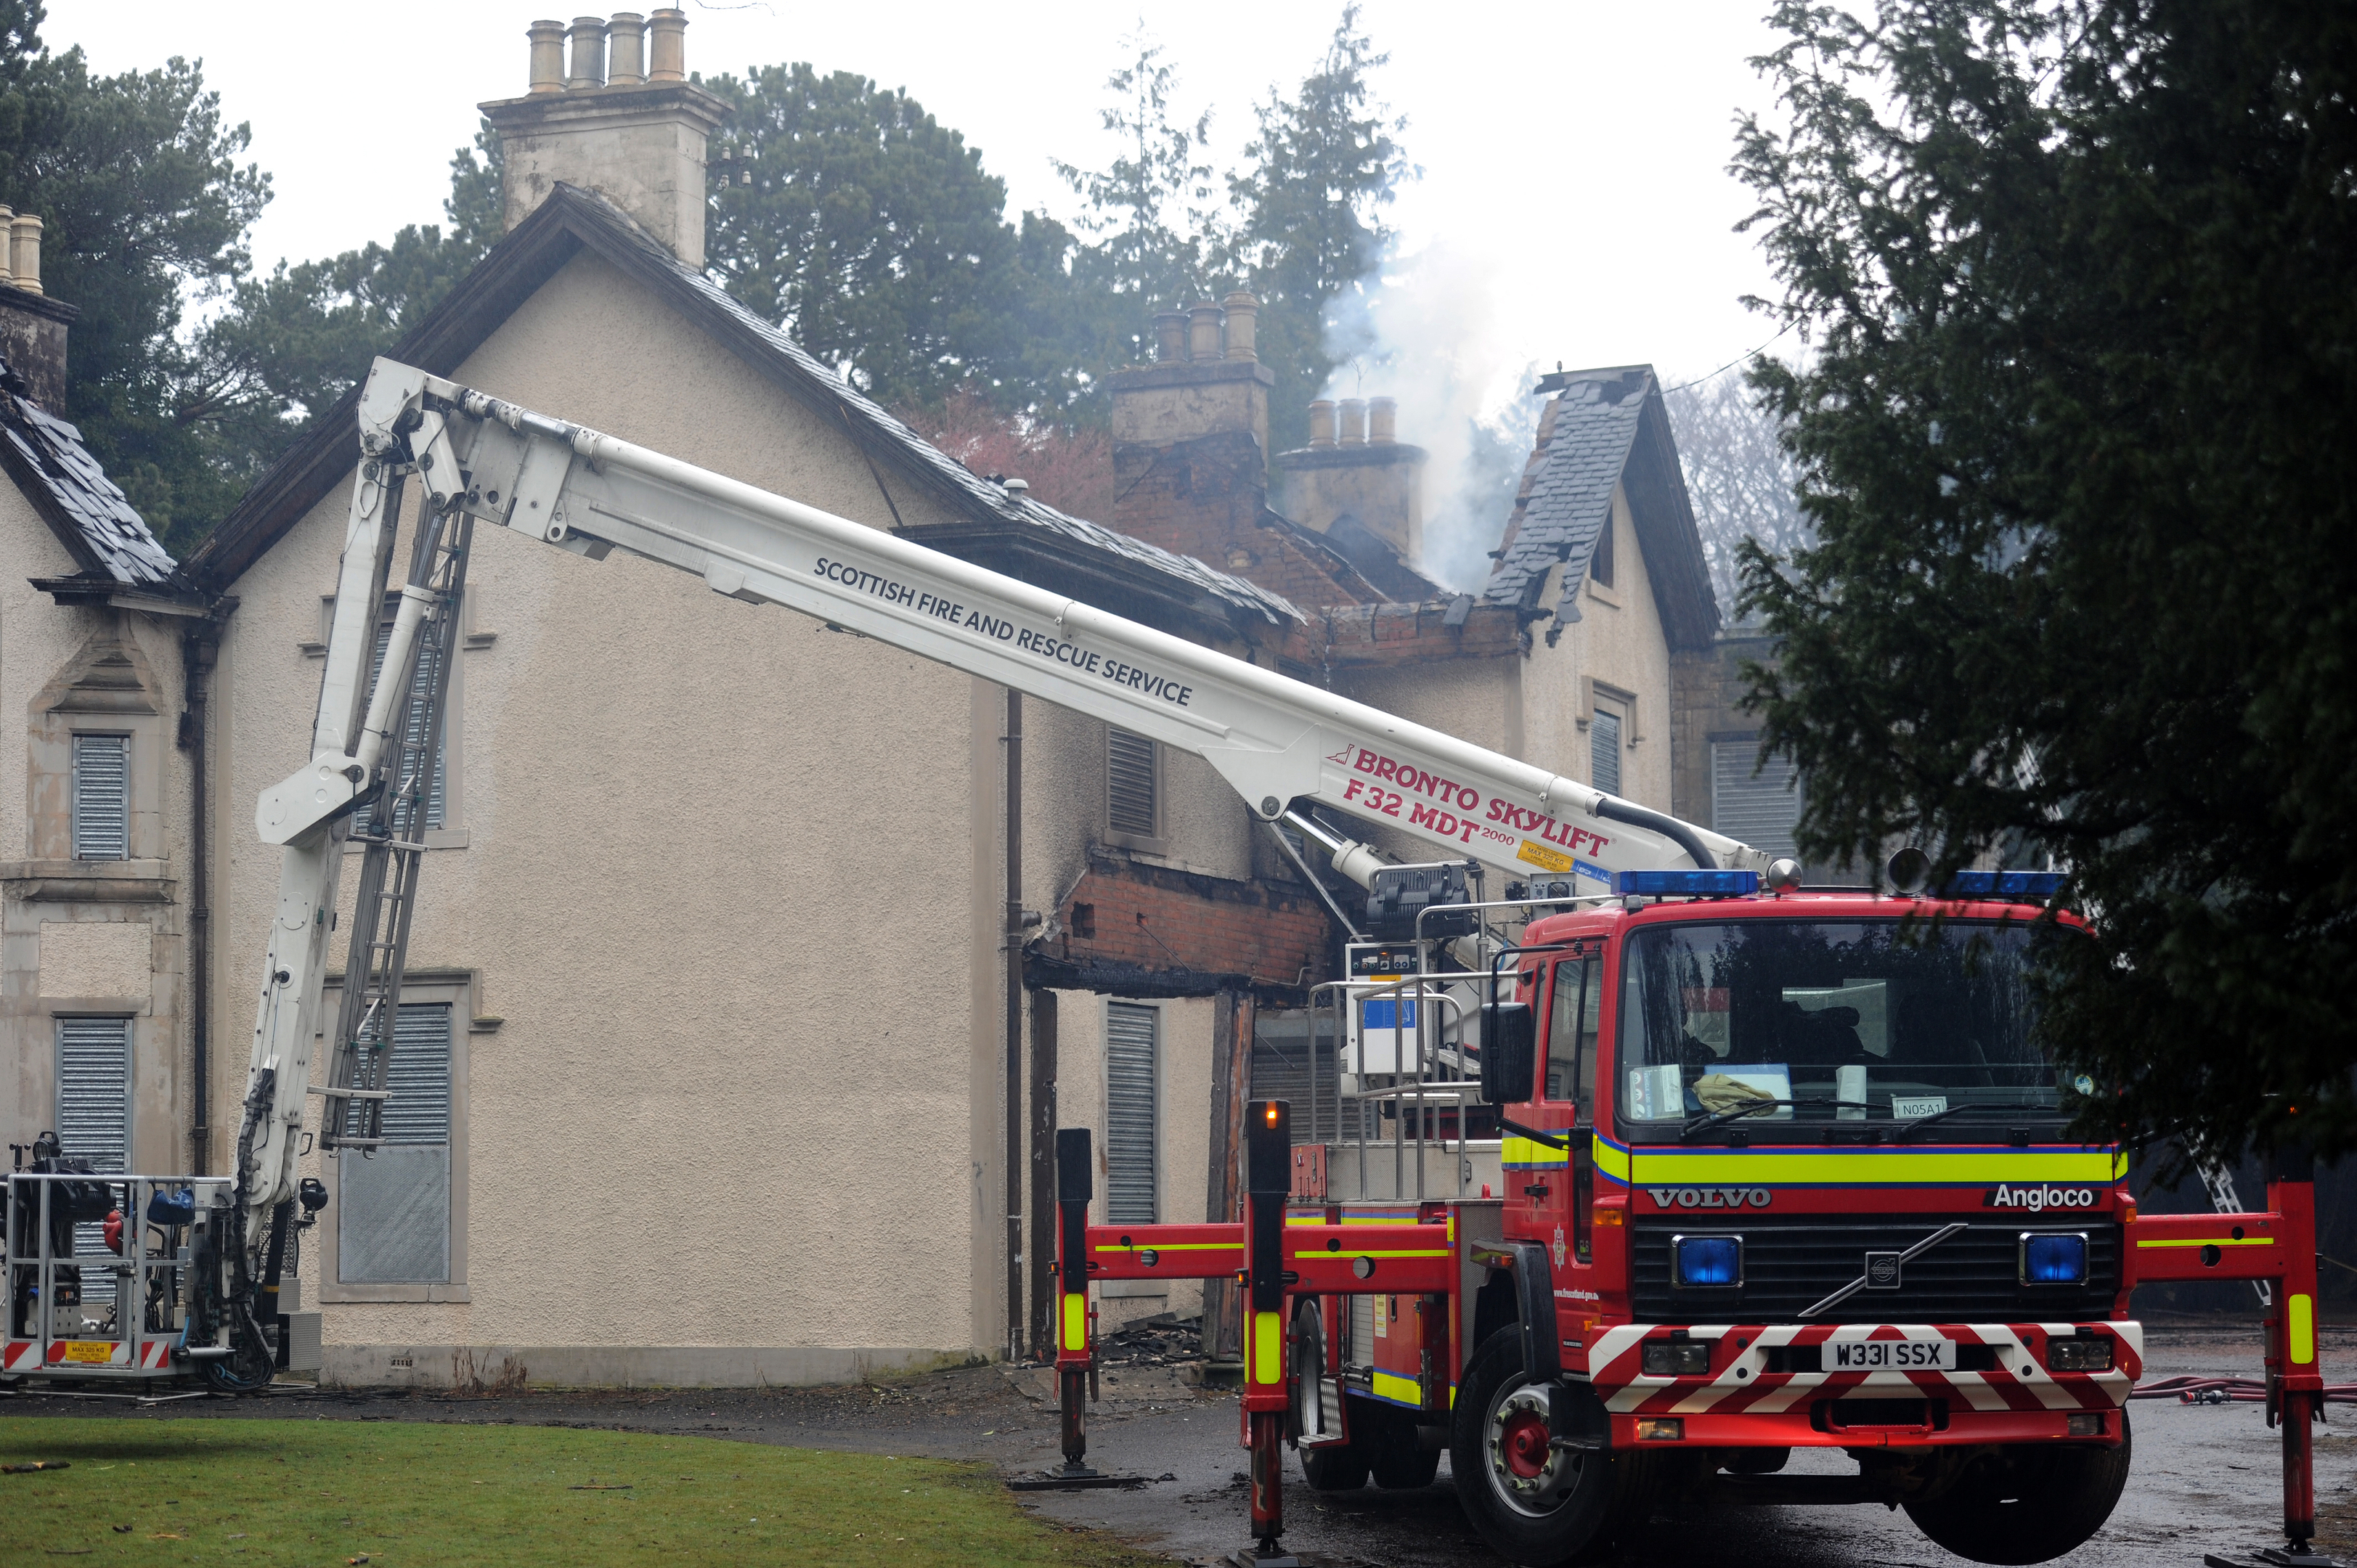 The fire gutted Silverburn House